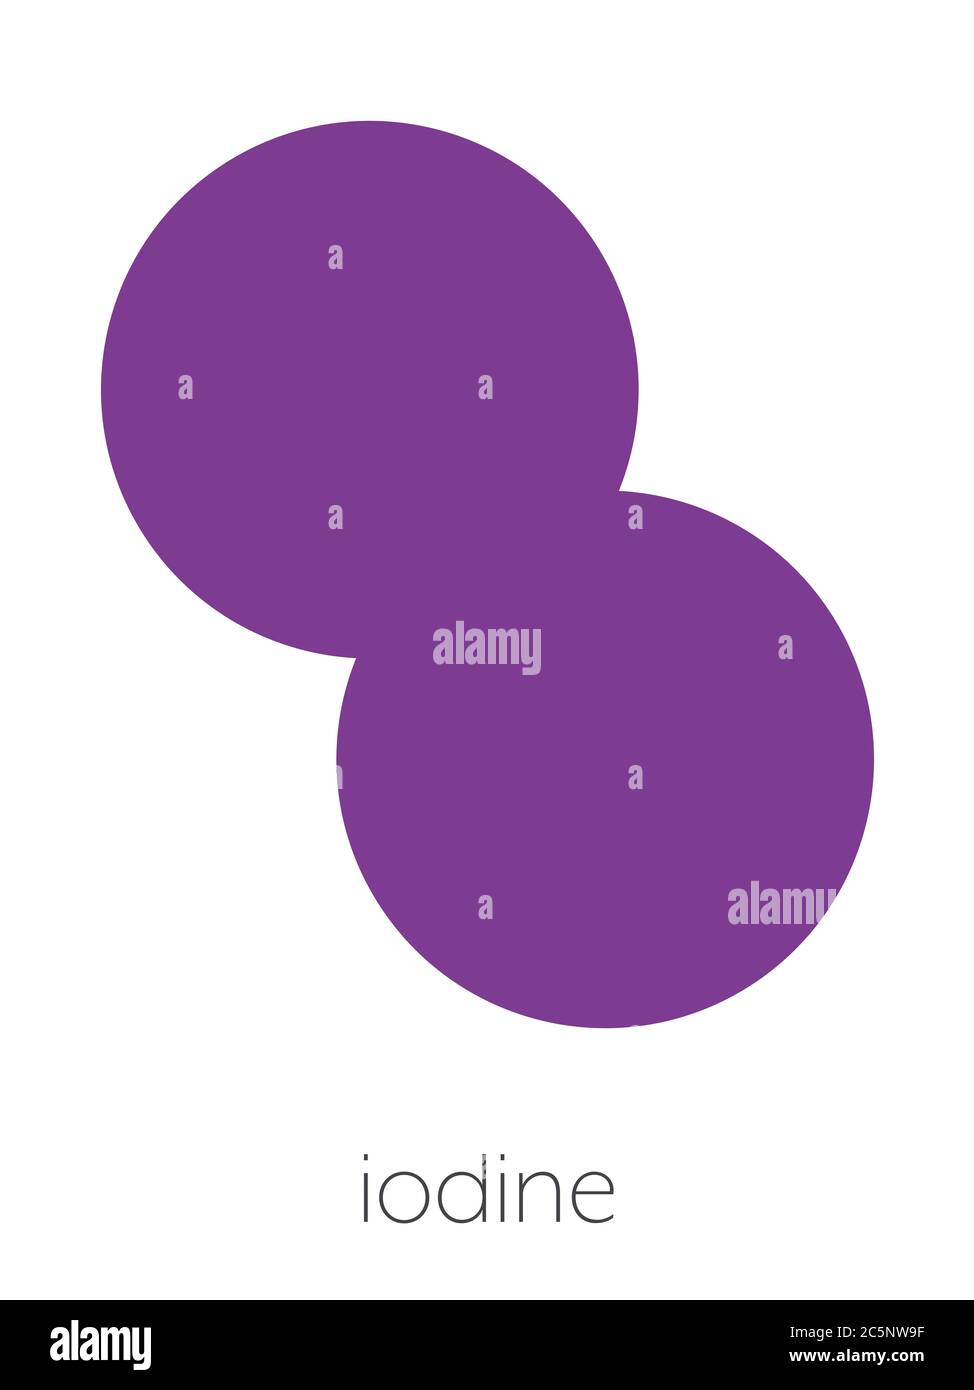 Iodine (I2) molecule. Solutions of elemental iodine are used as disinfectants. Stylized skeletal formula (chemical structure): Atoms are shown as color-coded circles: iodine (purple). Stock Photo